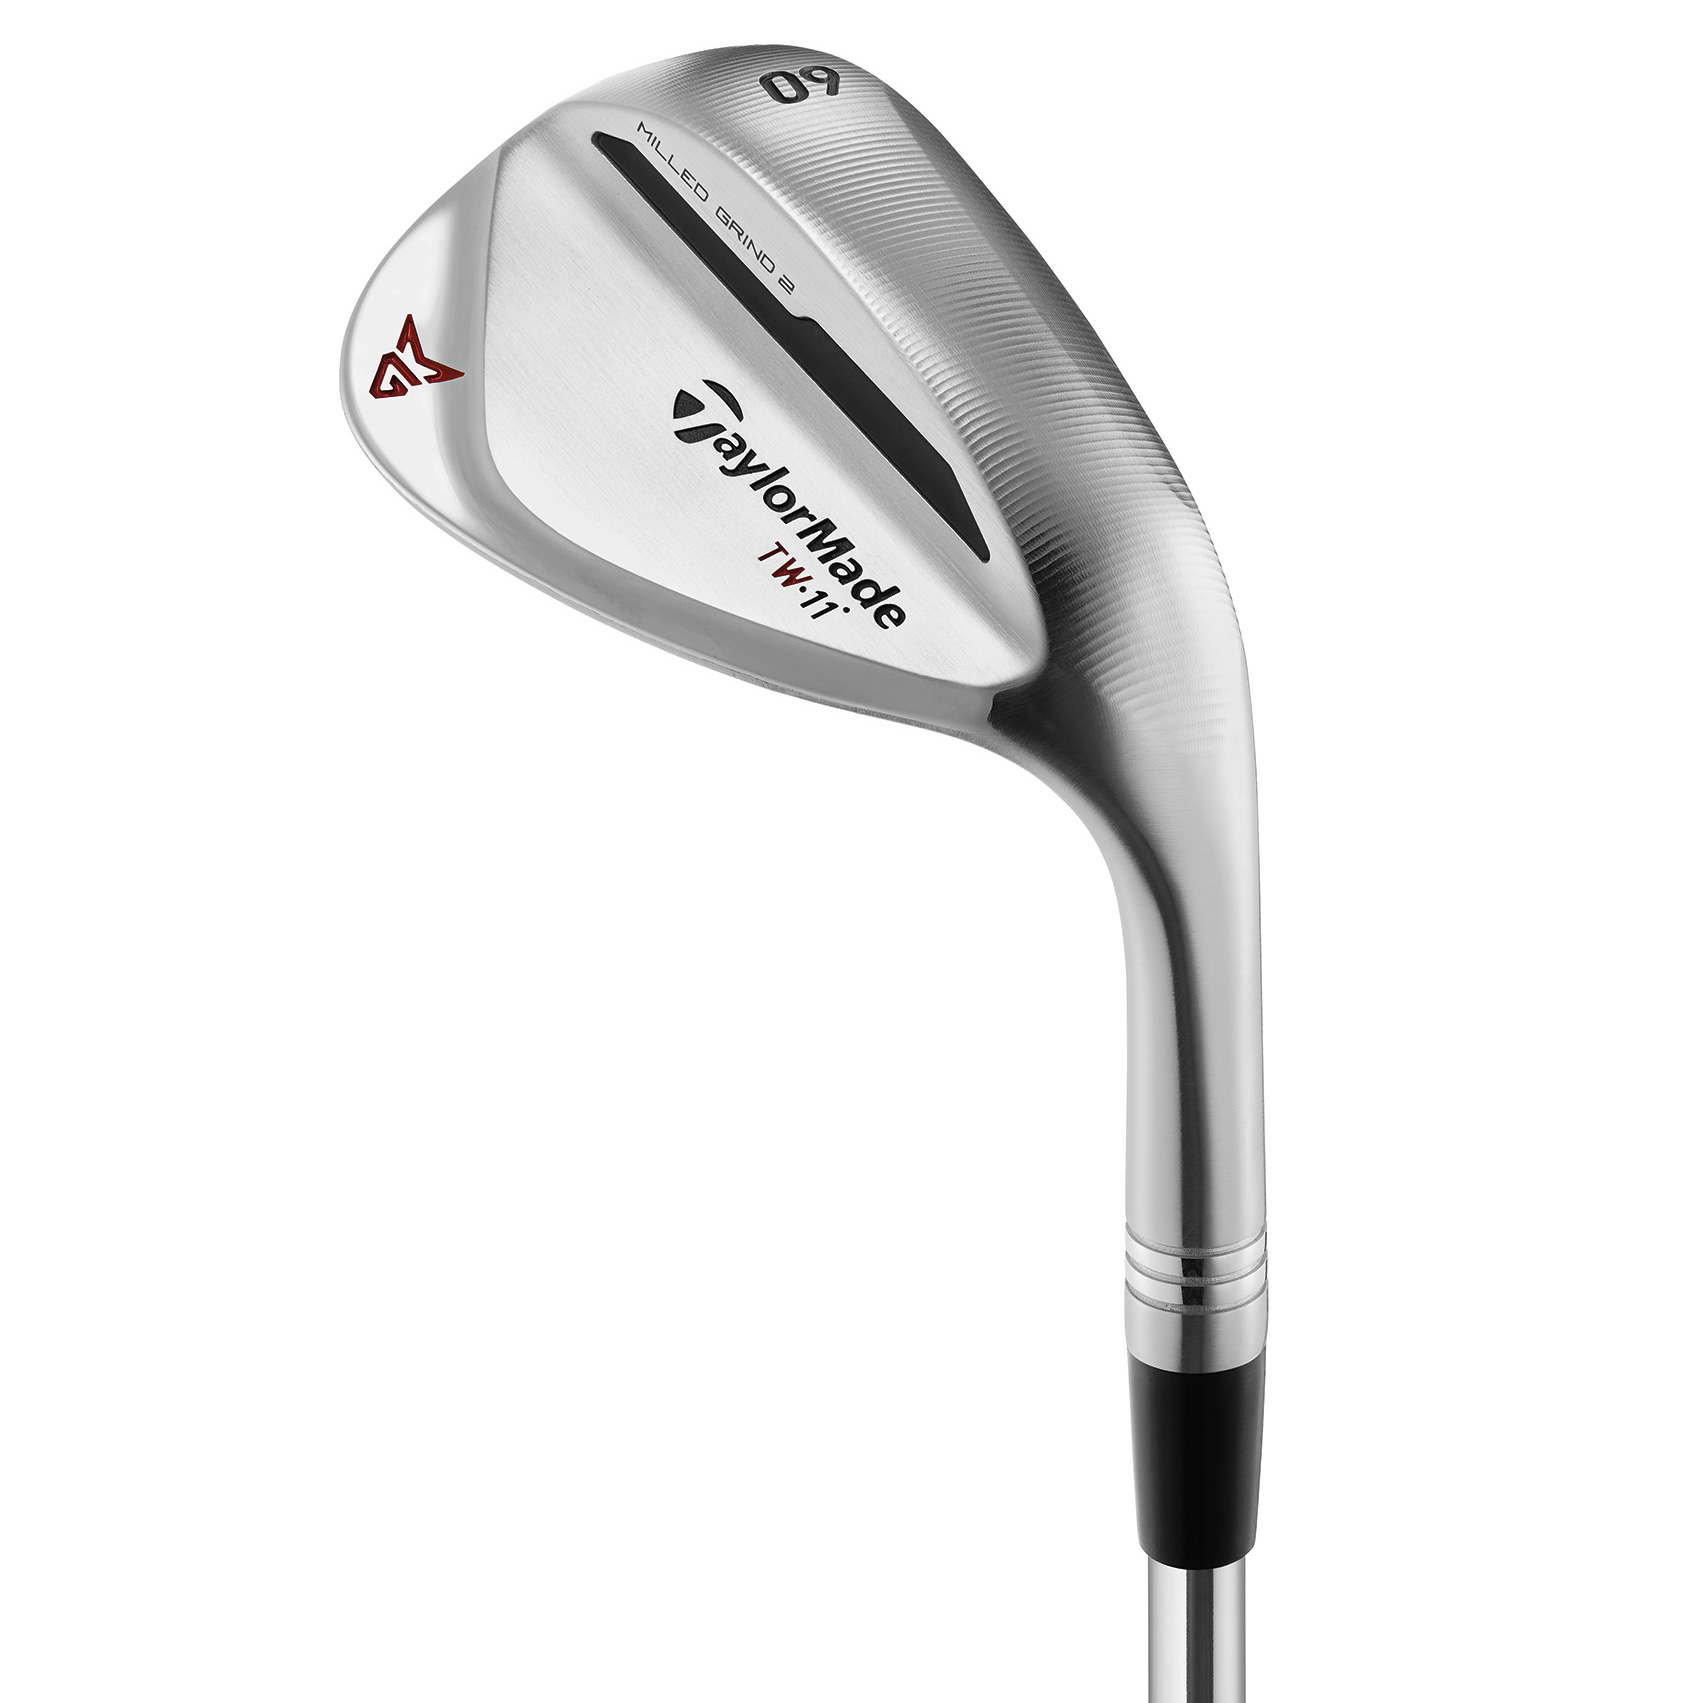 New TaylorMade MG2 Tiger Woods Wedge Head